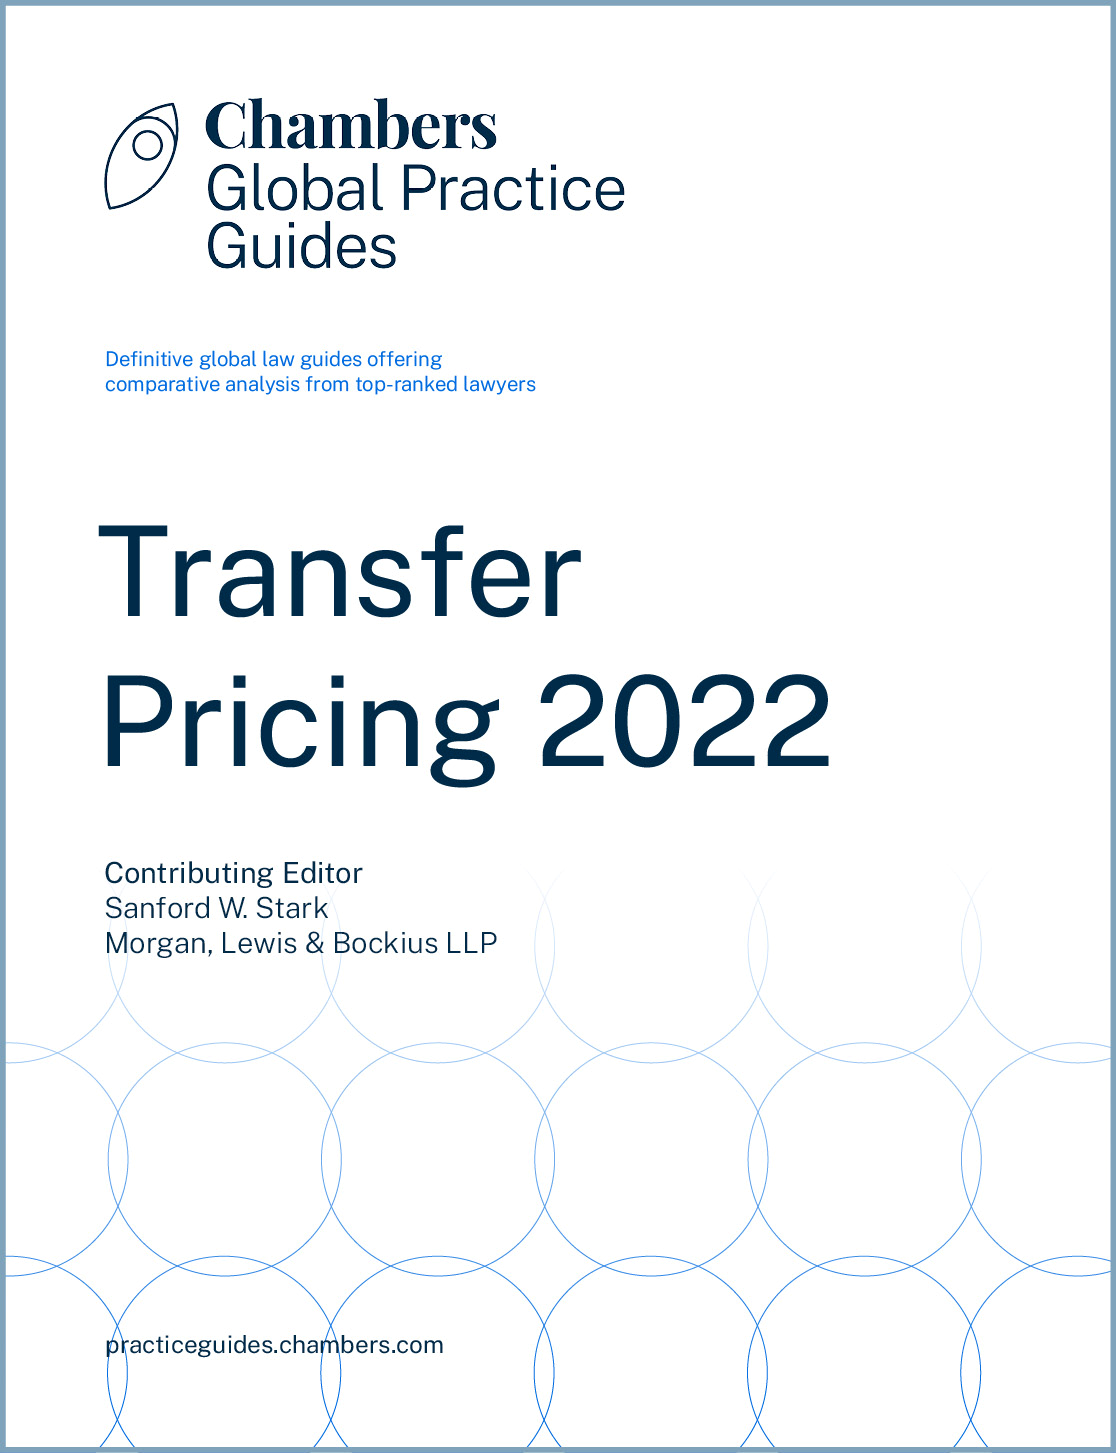 Transfer Pricing 2022 Global Practice Guides Chambers and Partners